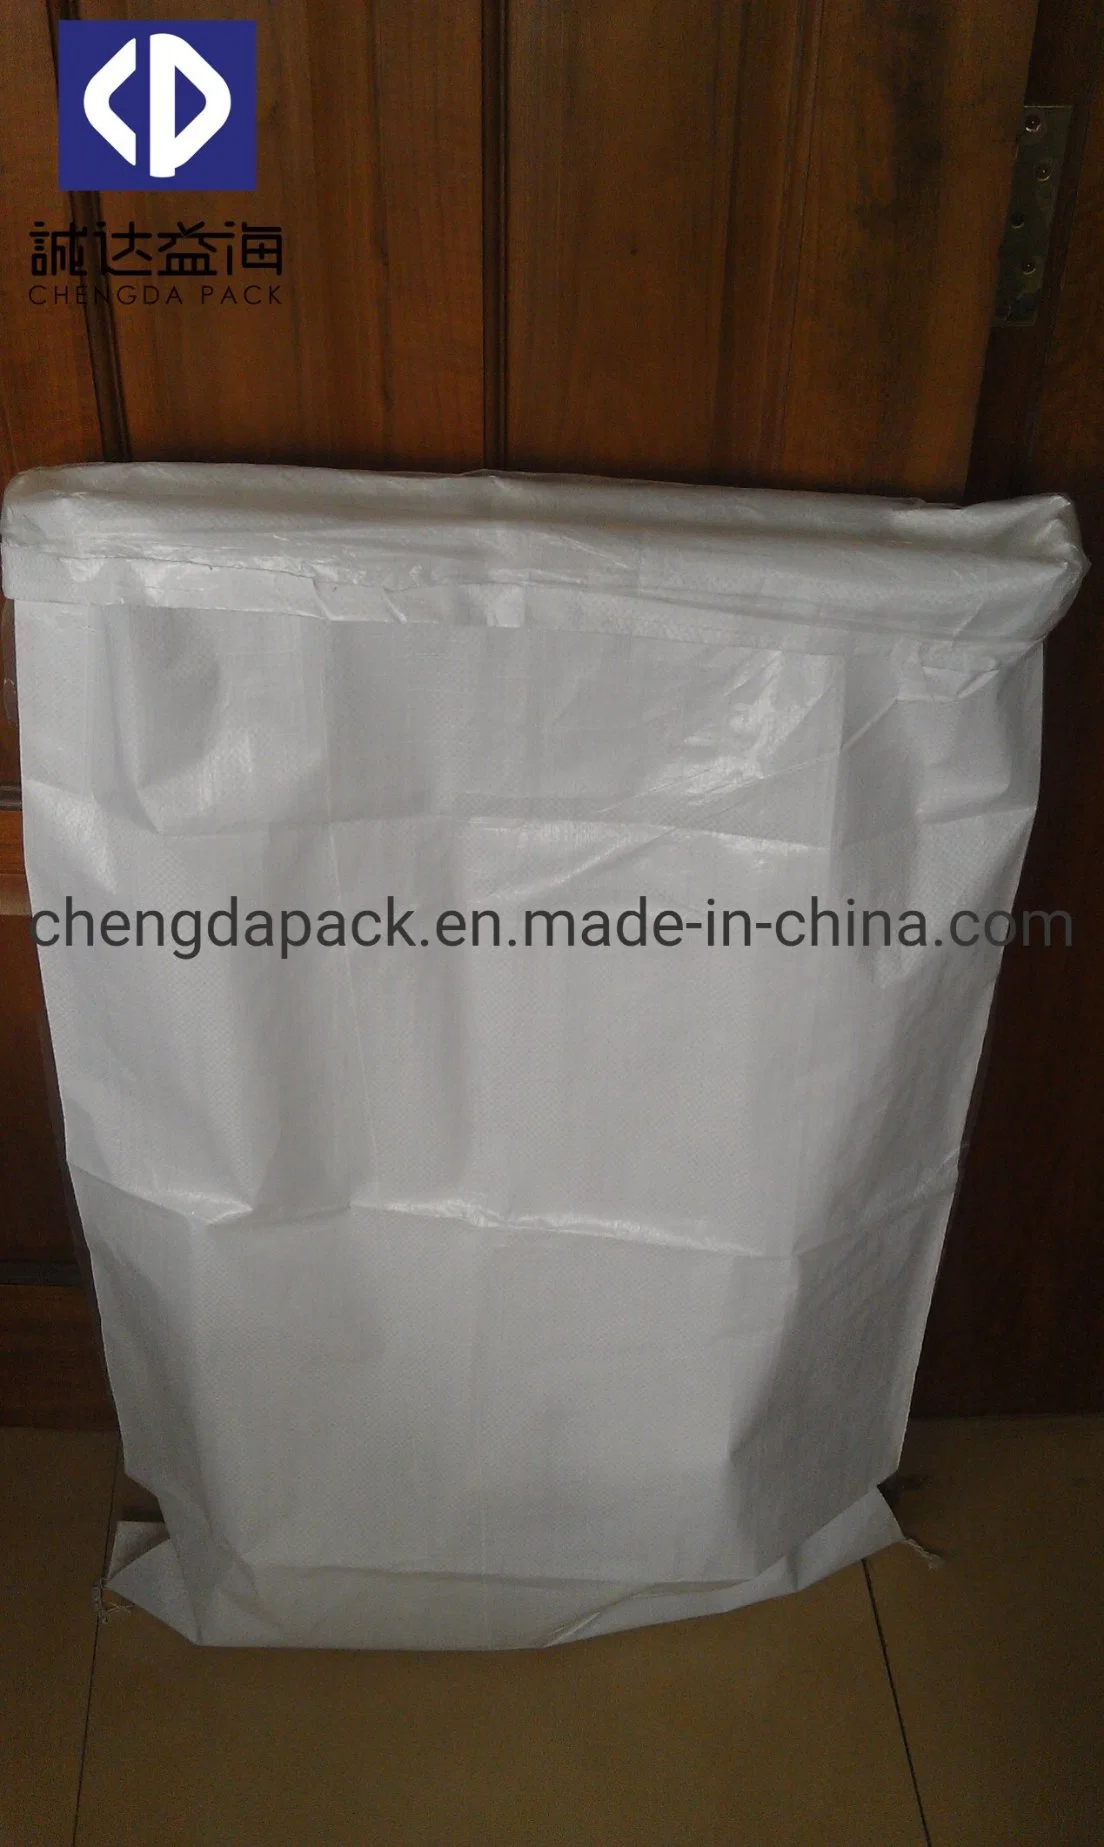 China Plastic PP Woven Polypropylene Rice Bag 50kg for Used Clothes Packing 50kg Plain White PP Woven Bags